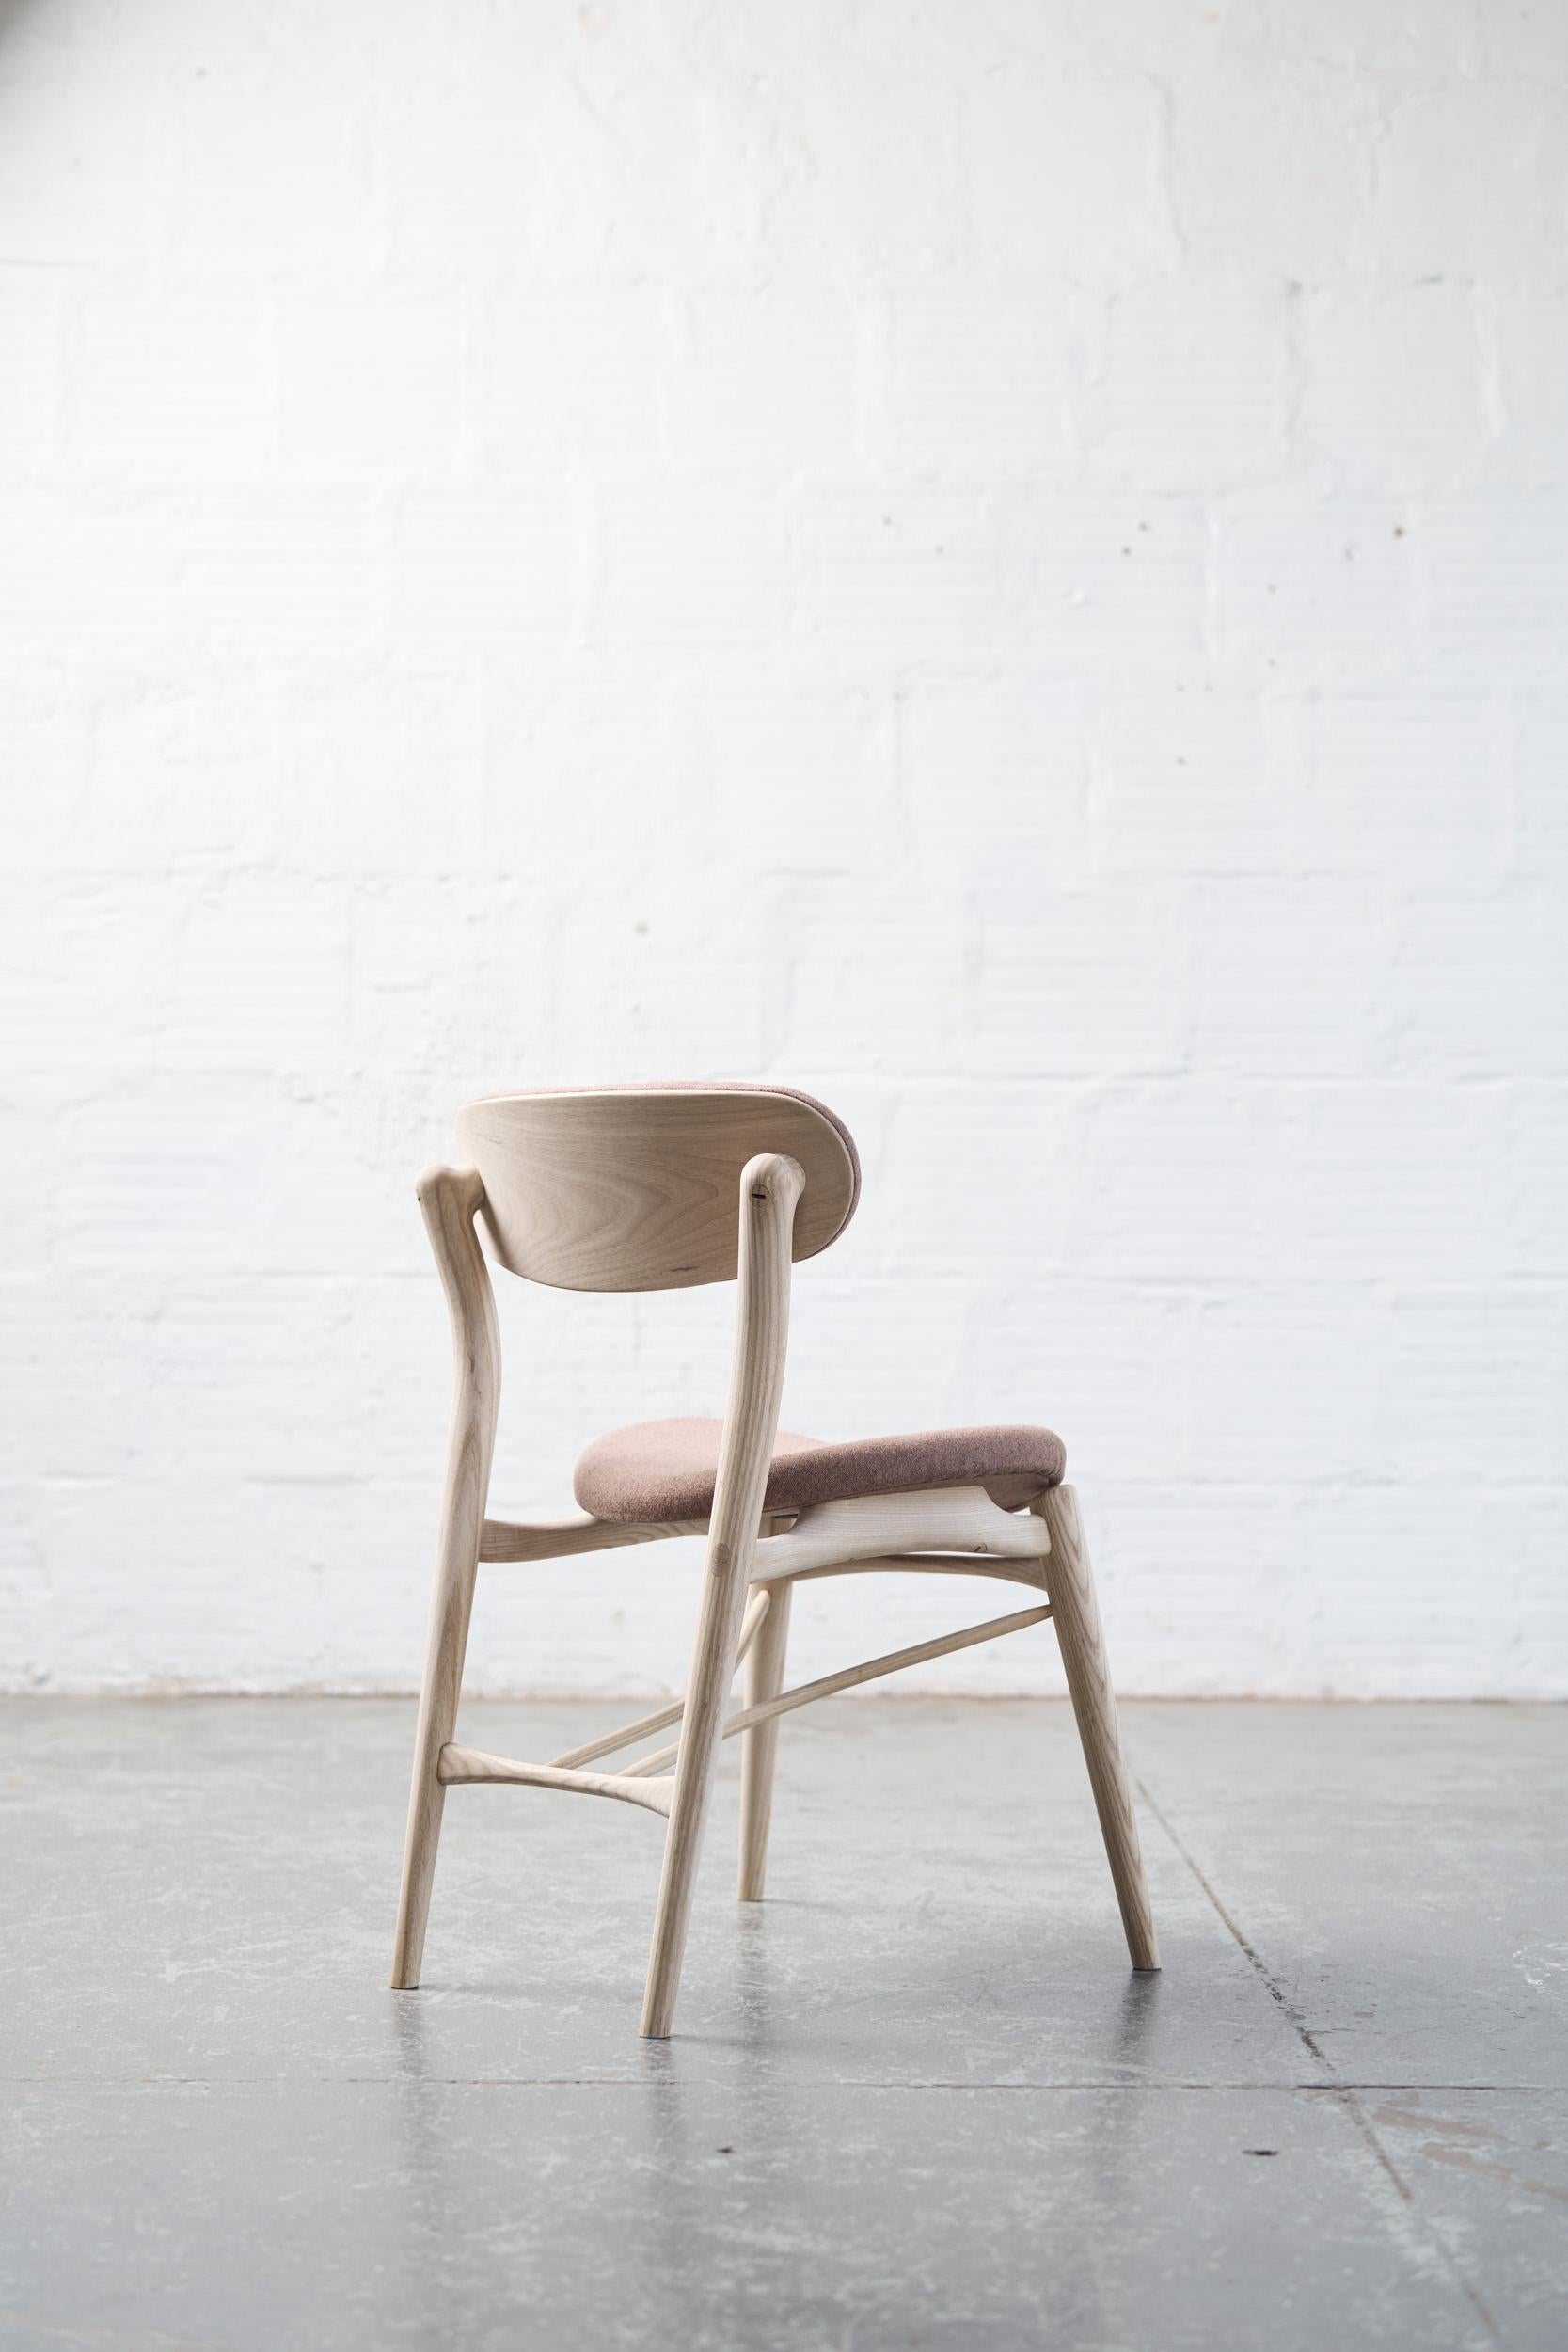 The Fjoon (pr. fyoon) collection rose out of a multi-year obsession with high end upholstery as well as an infatuation with wood joinery and principles of chair strength from the broader chair making community, especially windsor chair makers. My